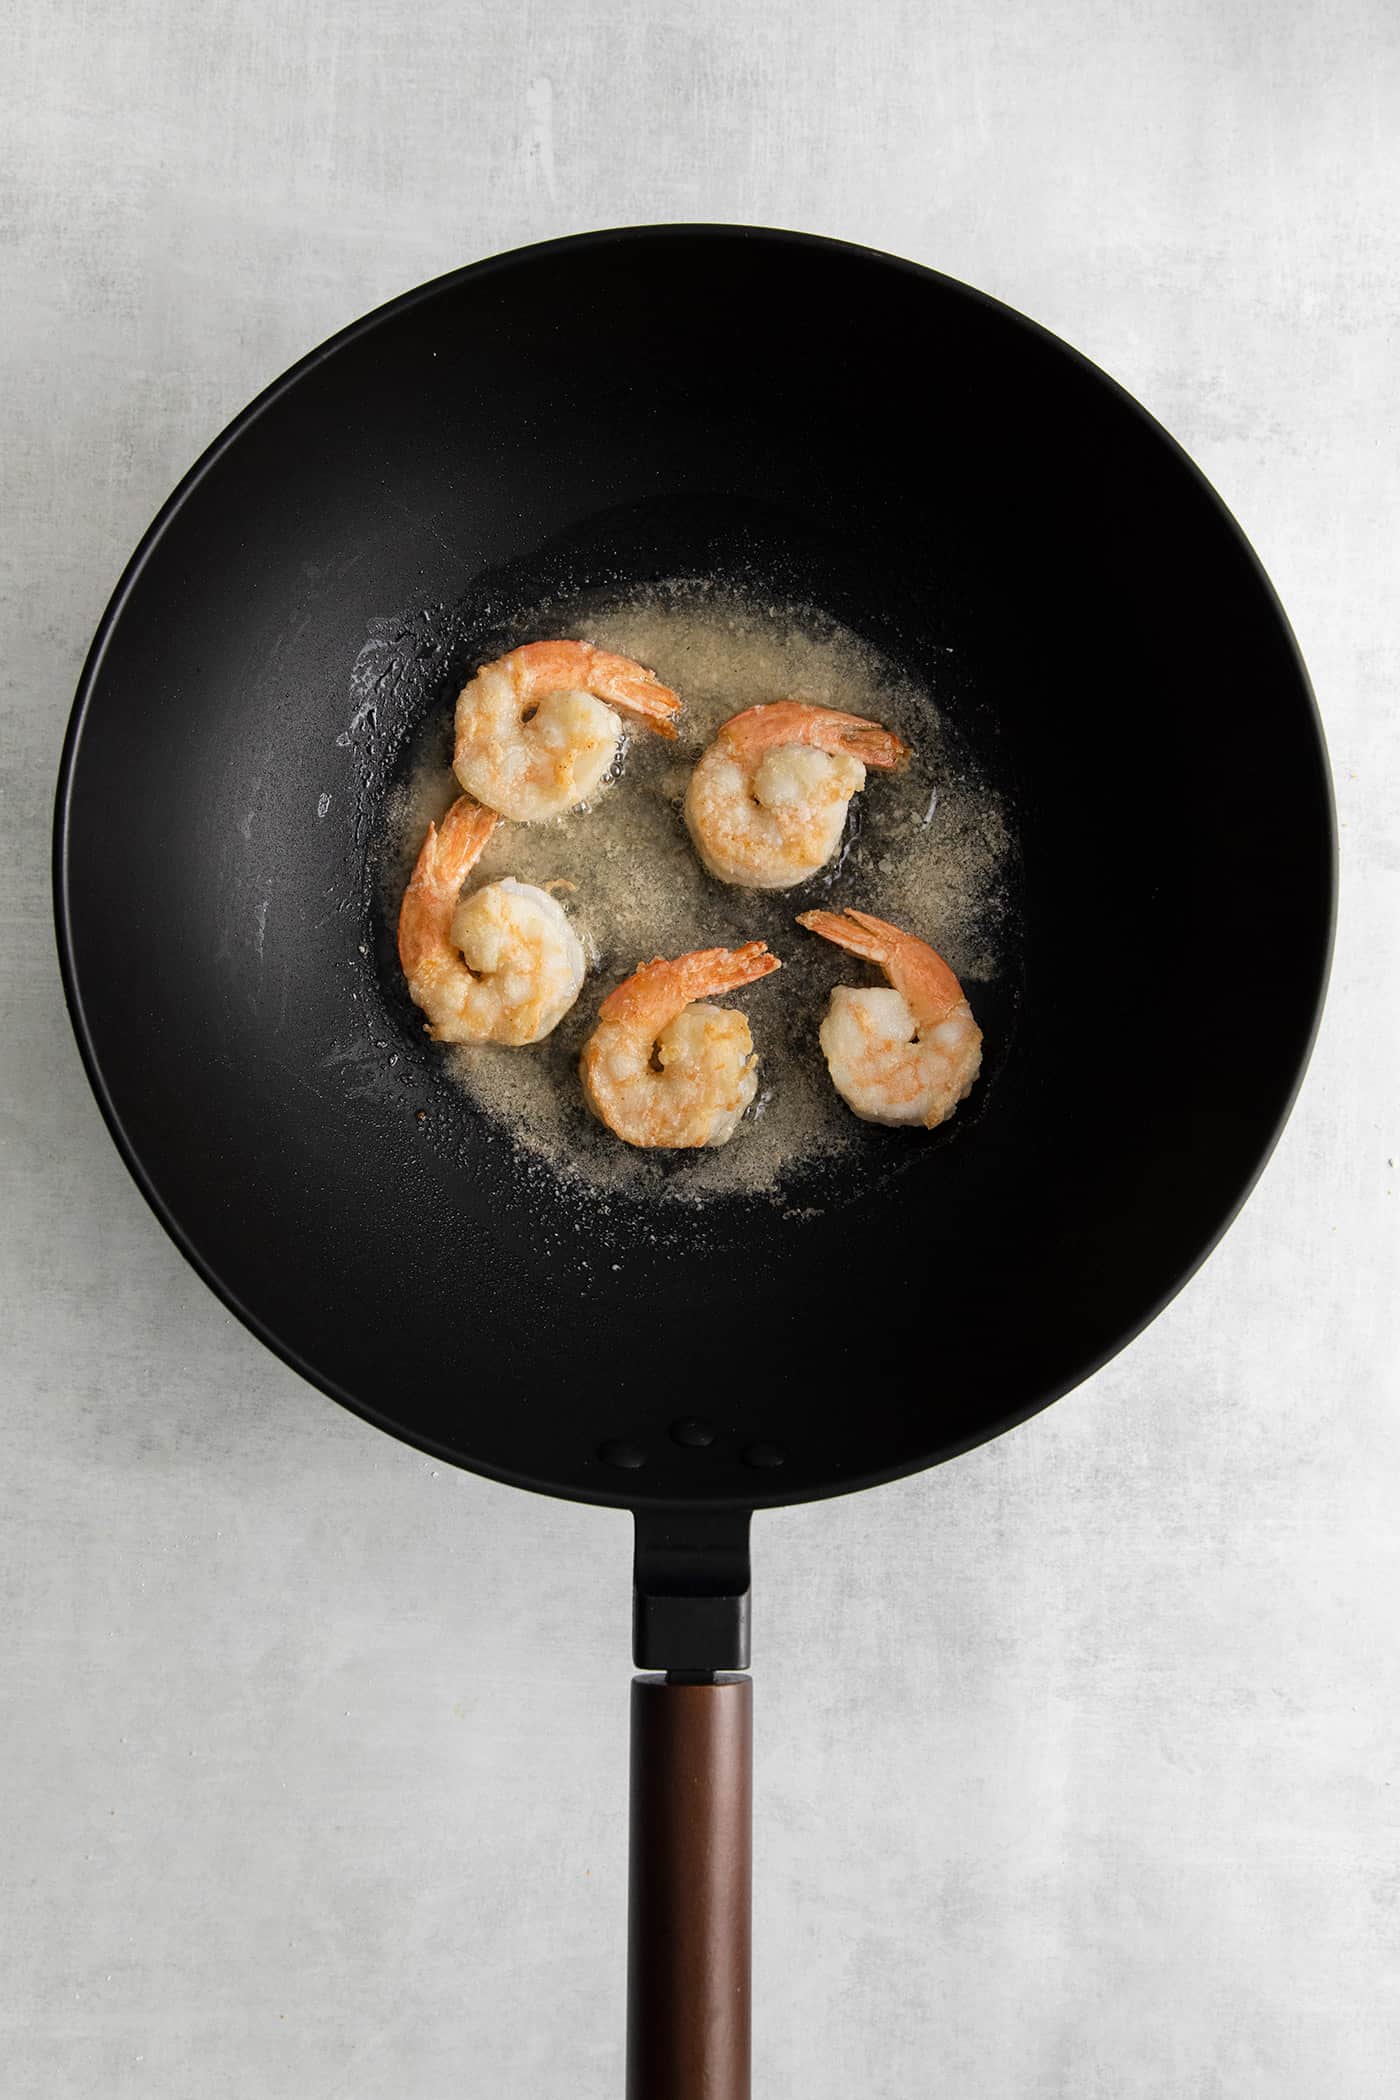 Shrimp frying in a cast iron skillet